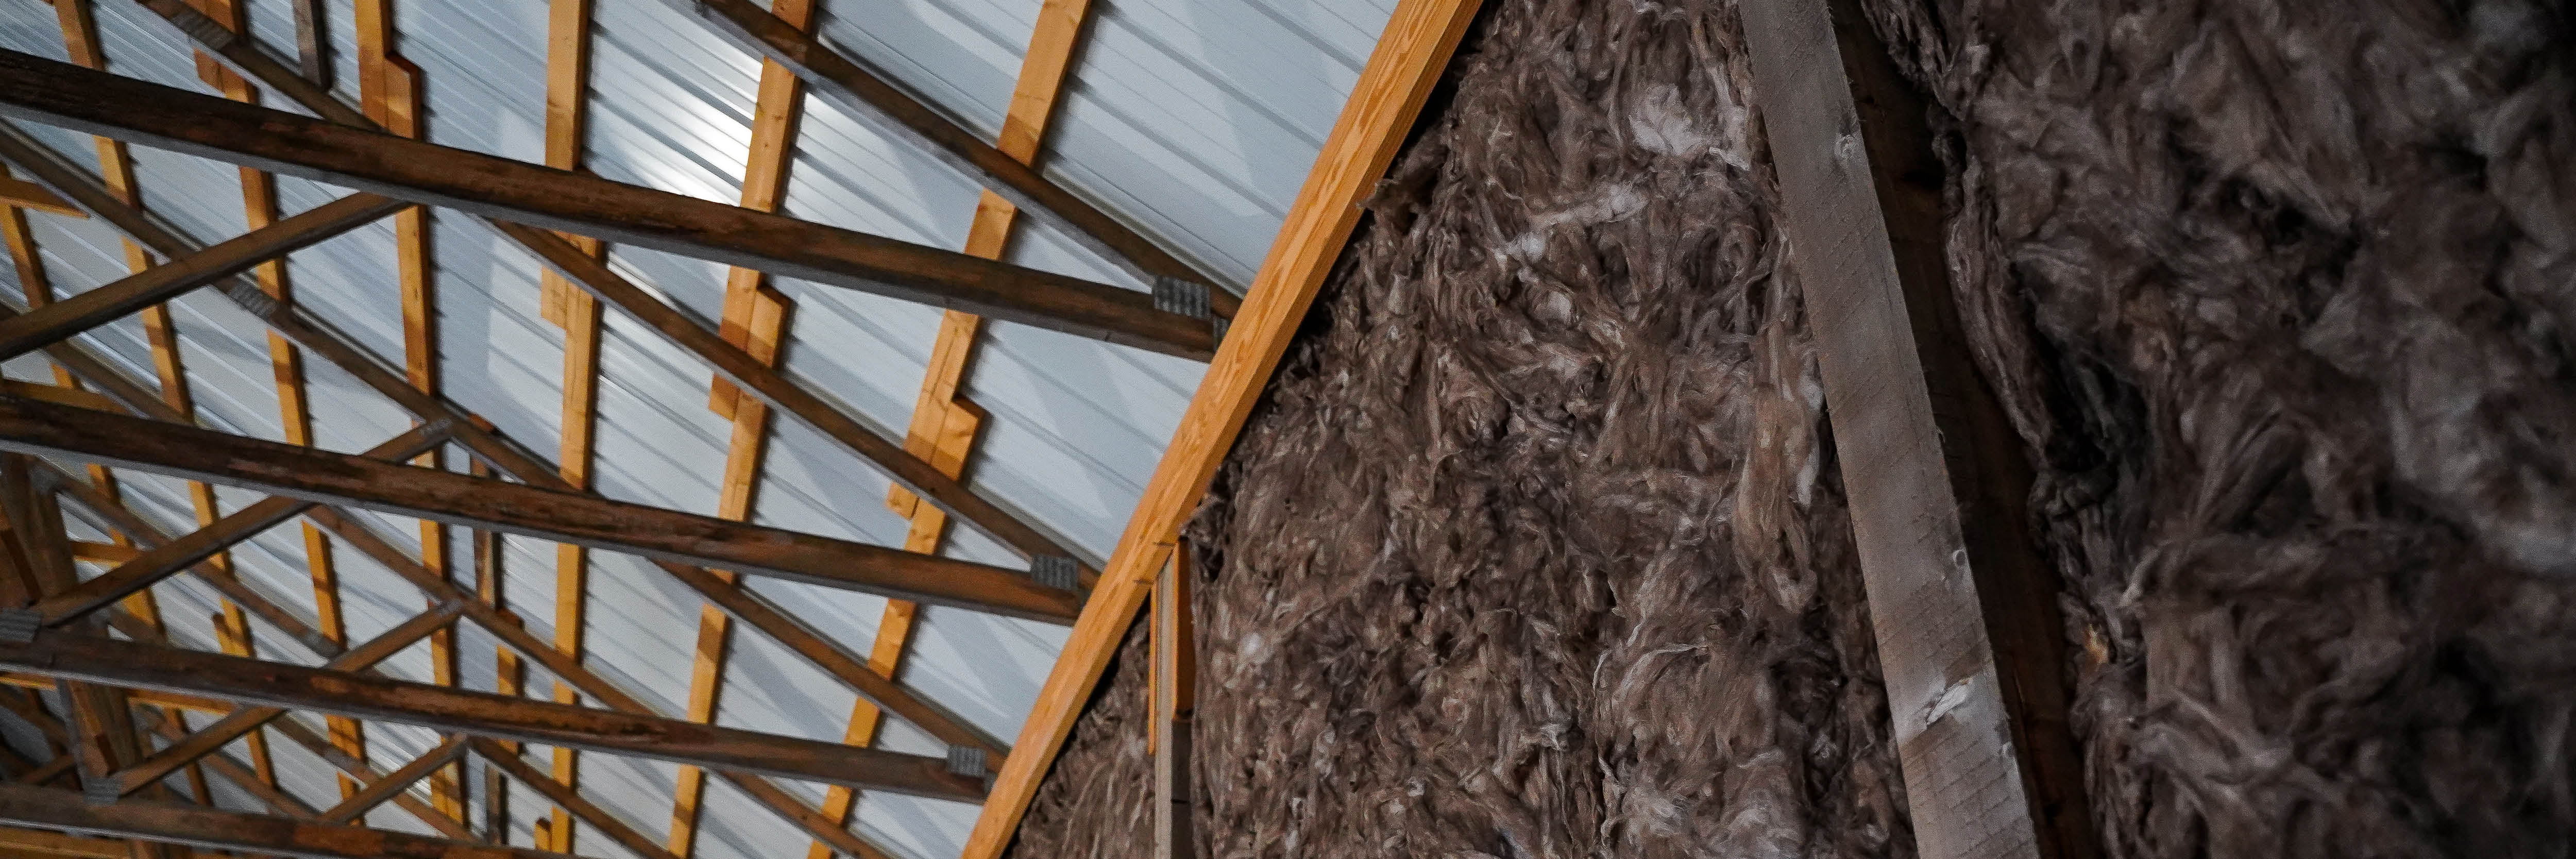 Can You Add Batt Insulation to an Existing Pole Barn?